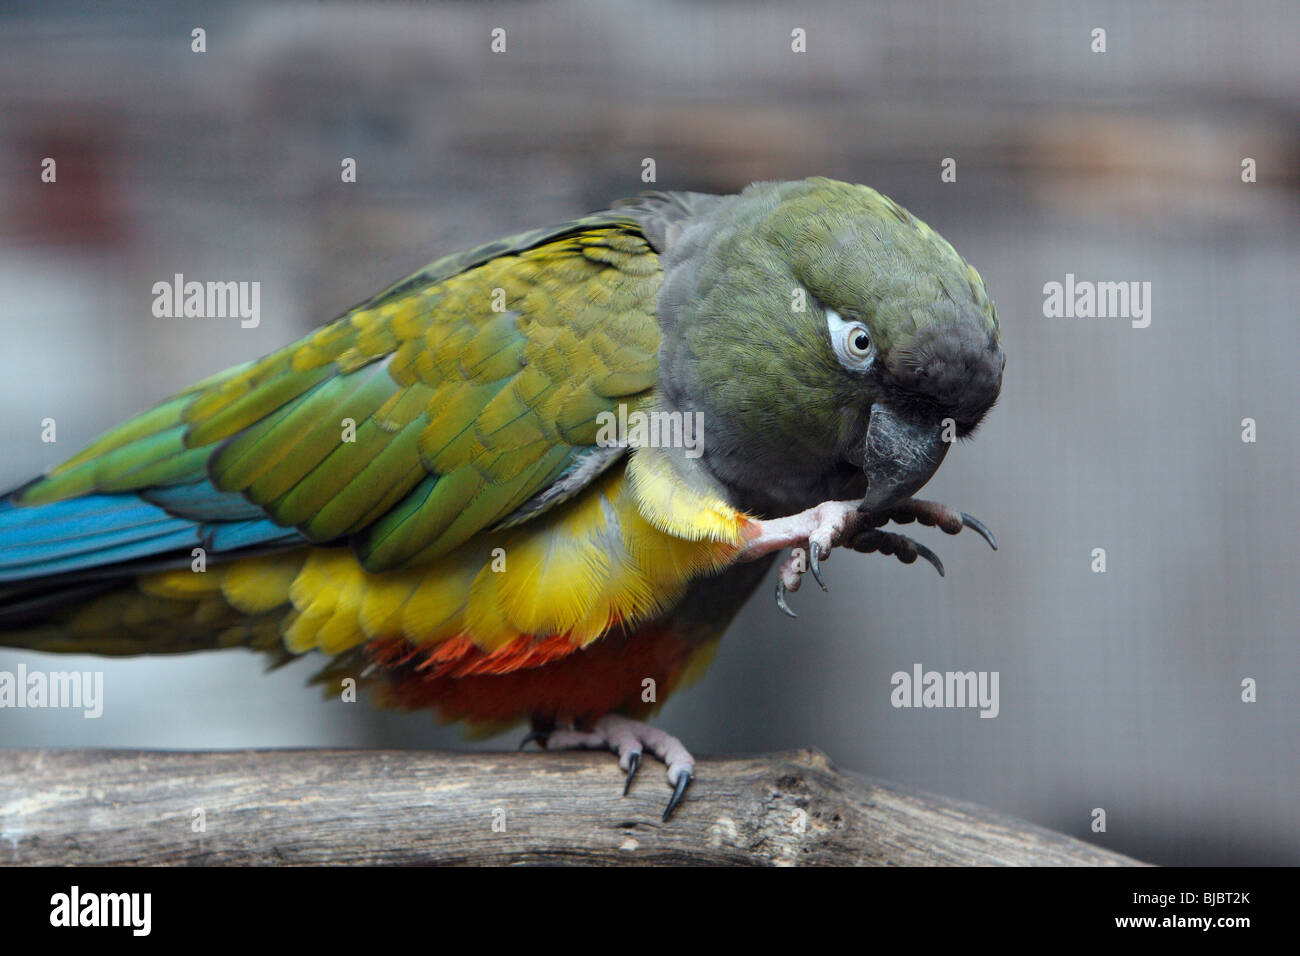 Burrowing Parrot / Patagonian conure (Cyanoliseus patagonus), cleaning foot, perched on stick Stock Photo